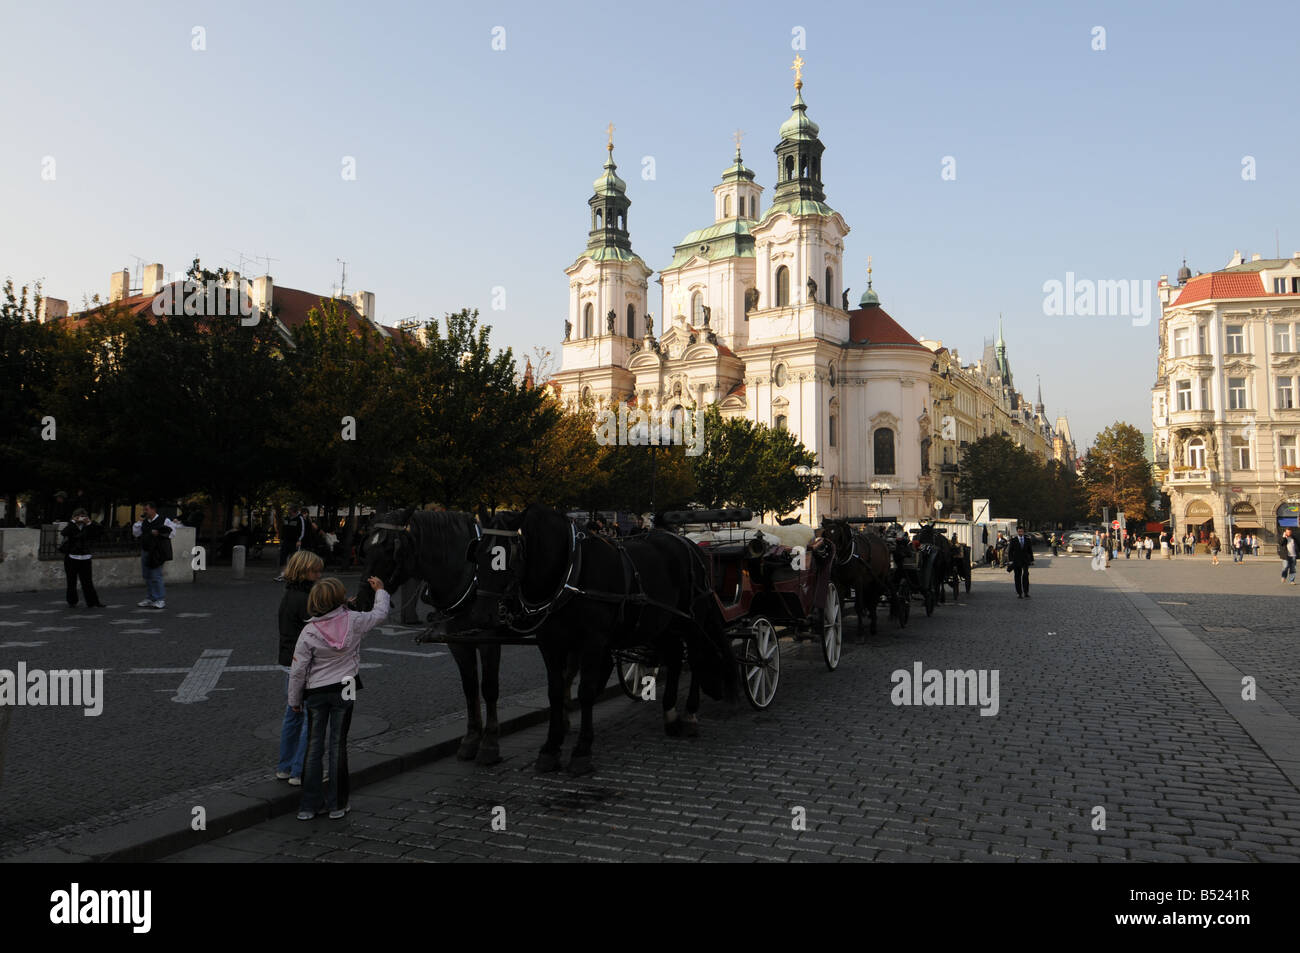 View of Old Town Square and church of St Nicholas Prague, Czech Republic Stock Photo